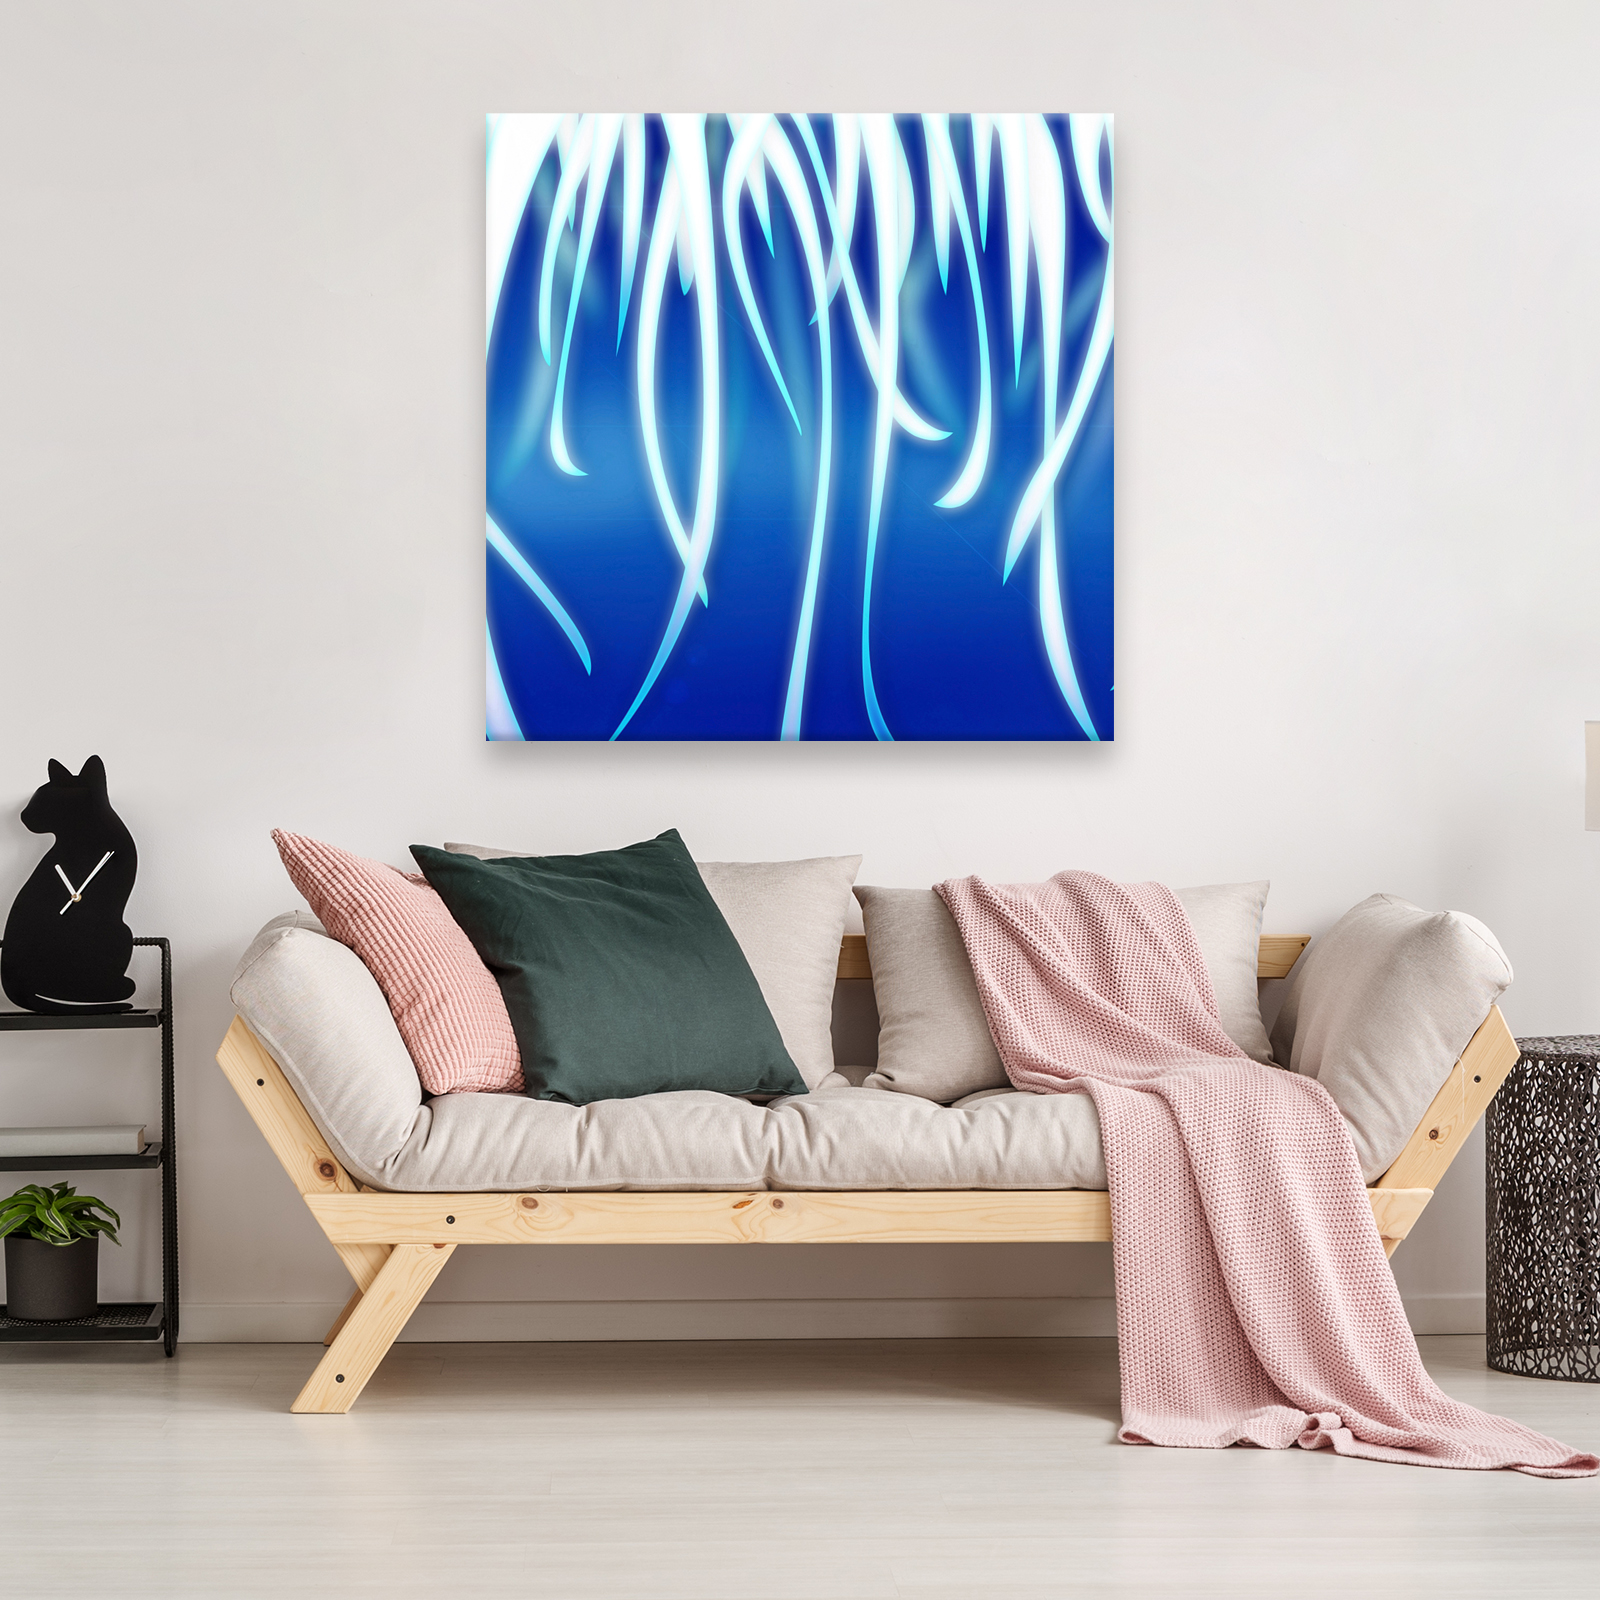 AB063 Blue White Surreal Modern Abstract Canvas Wall Art Large Picture Prints 